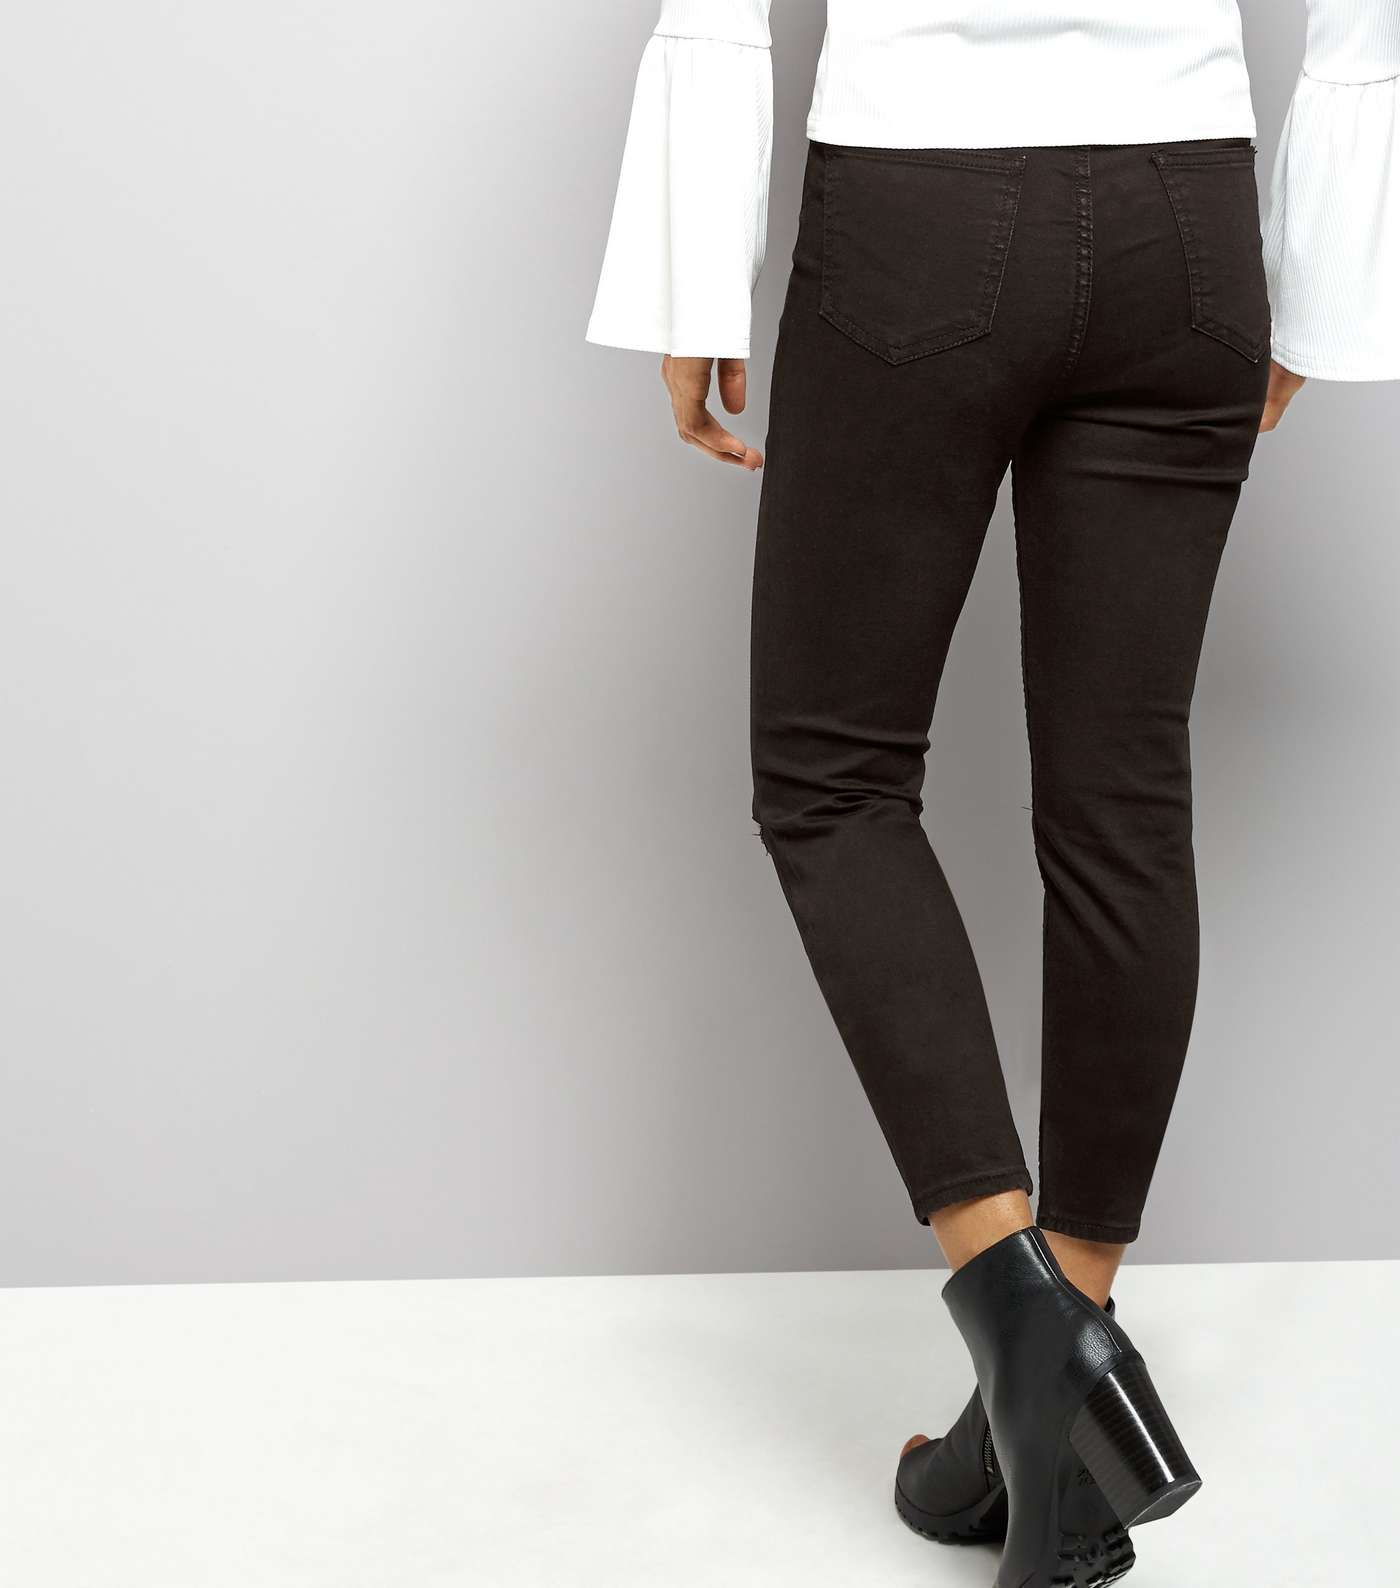 Petite Black High Waisted Ripped Knee Skinny Jeans Image 3